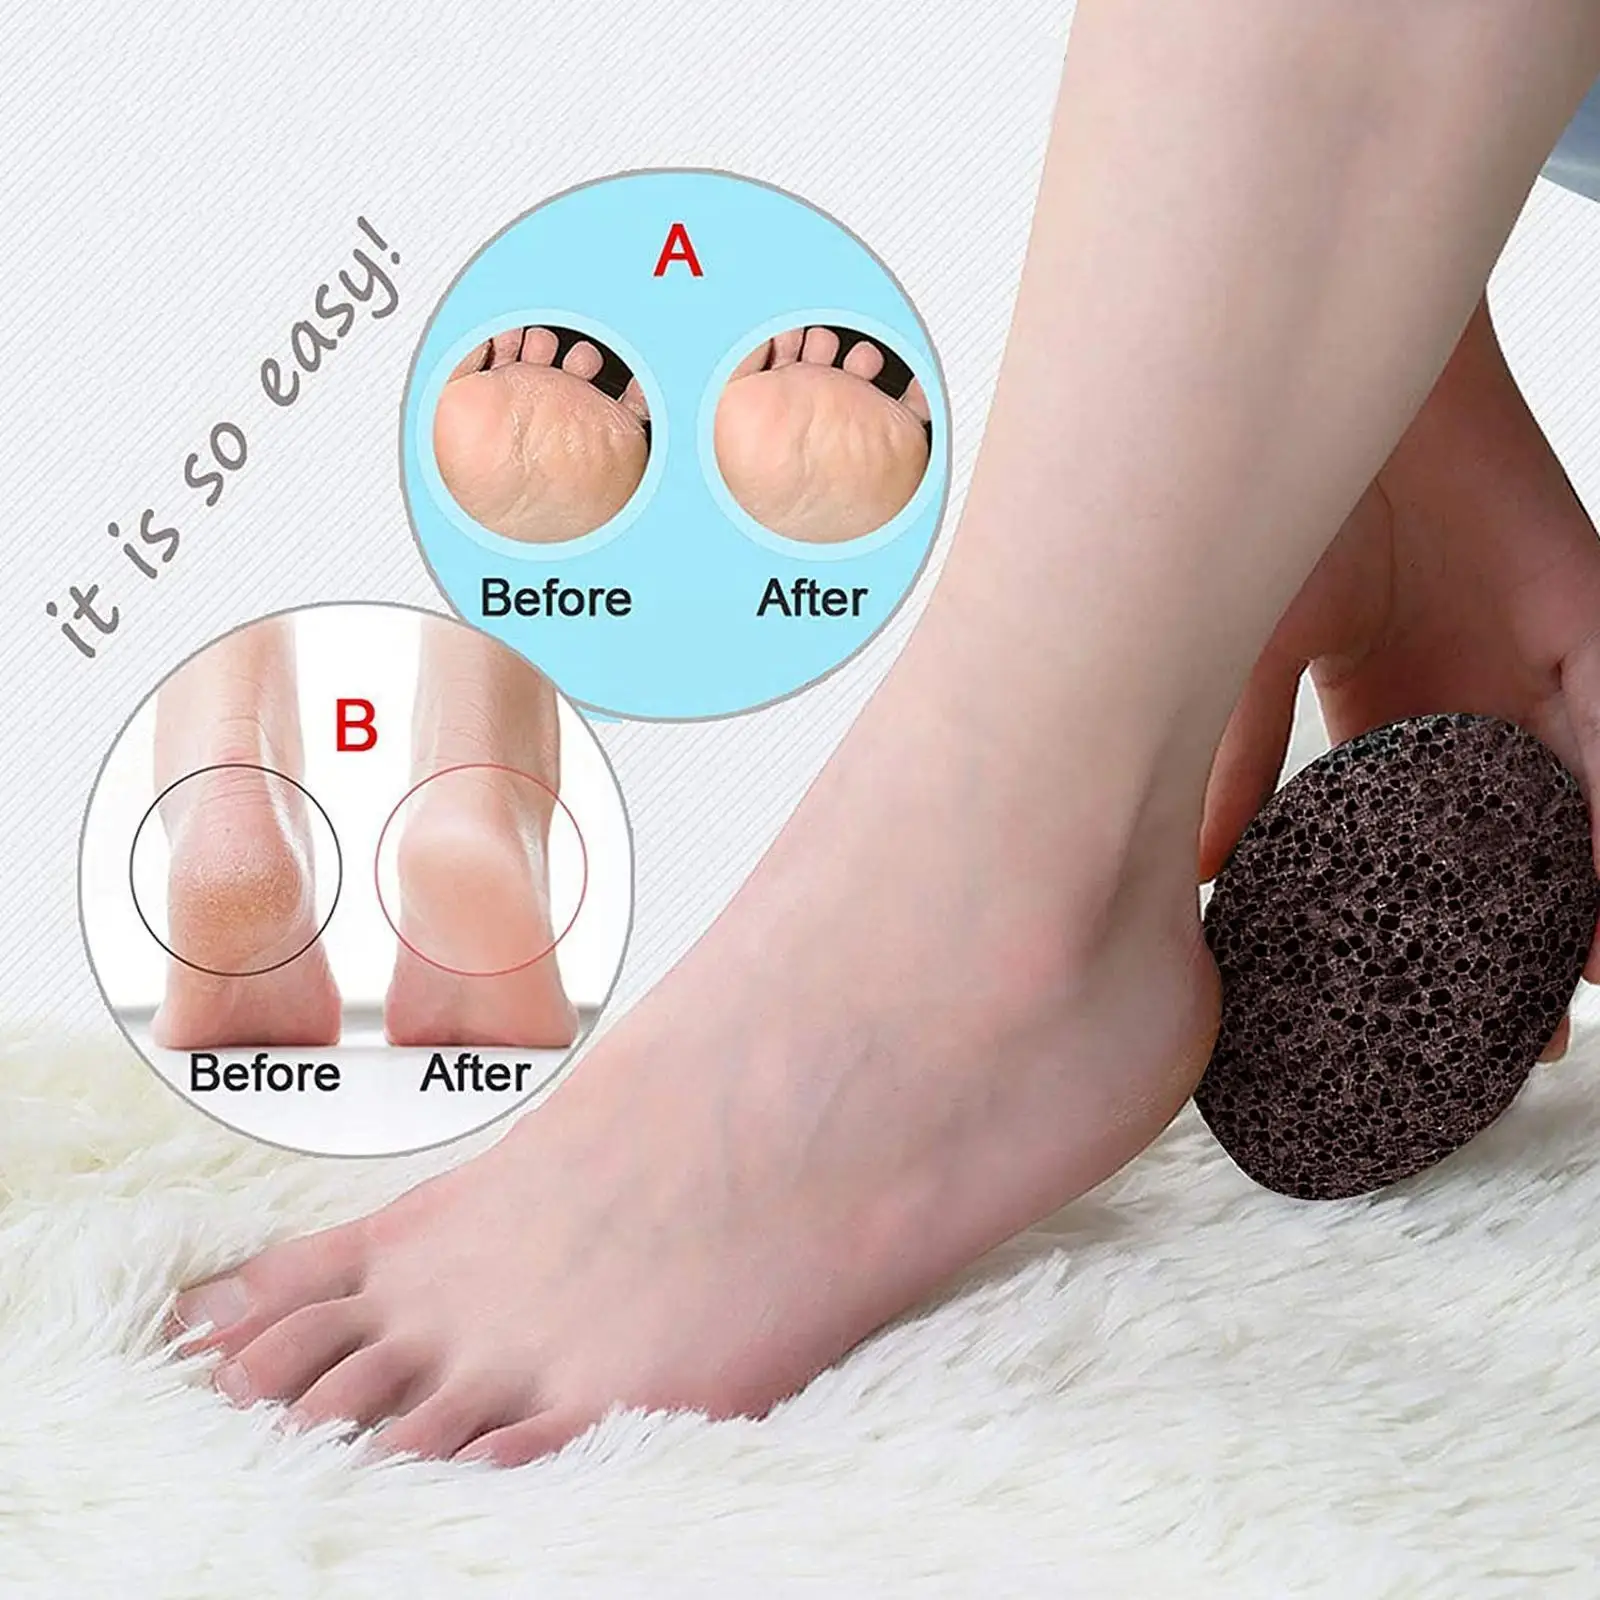 

Natural Grinding Stone Pumice Stone For Feet Exfoliator Foot Scrubber Callus Remover Dead Skin Grinding Callus Foot Care To W1v3